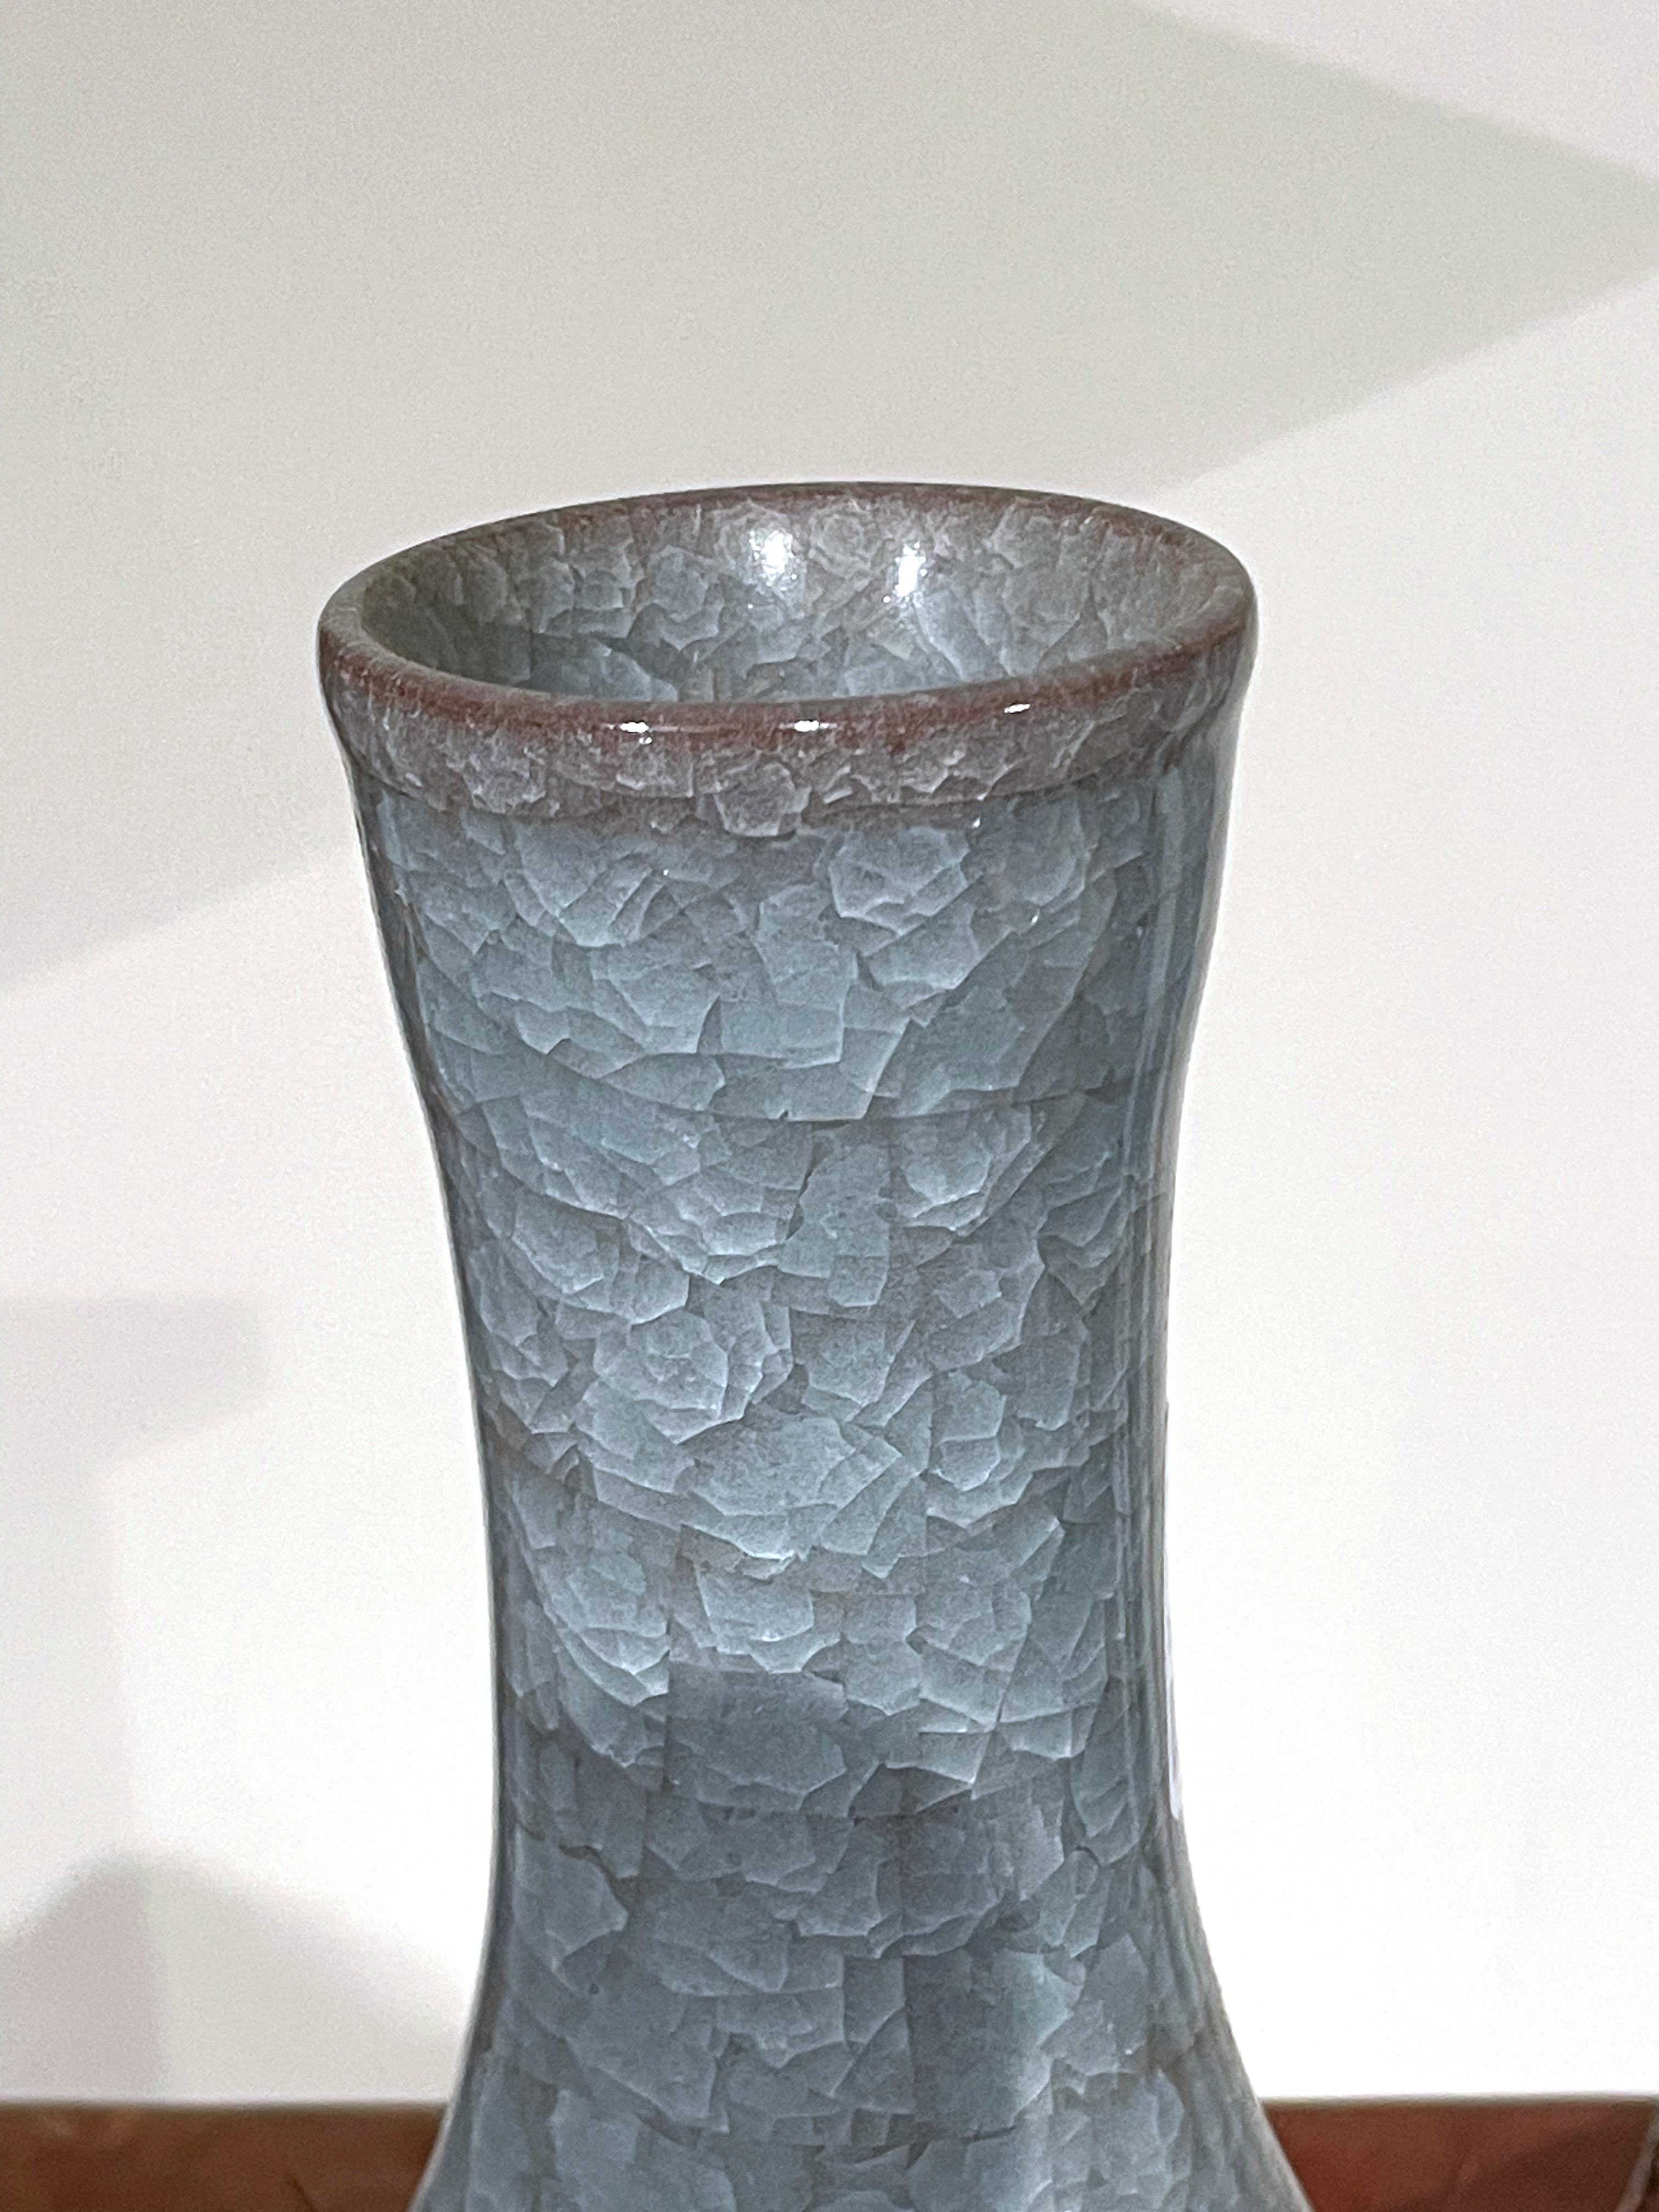 Contemporary Chinese blue vase with crackle glaze.
Classic funnel neck.
From a large collection with varying shapes and sizes.
